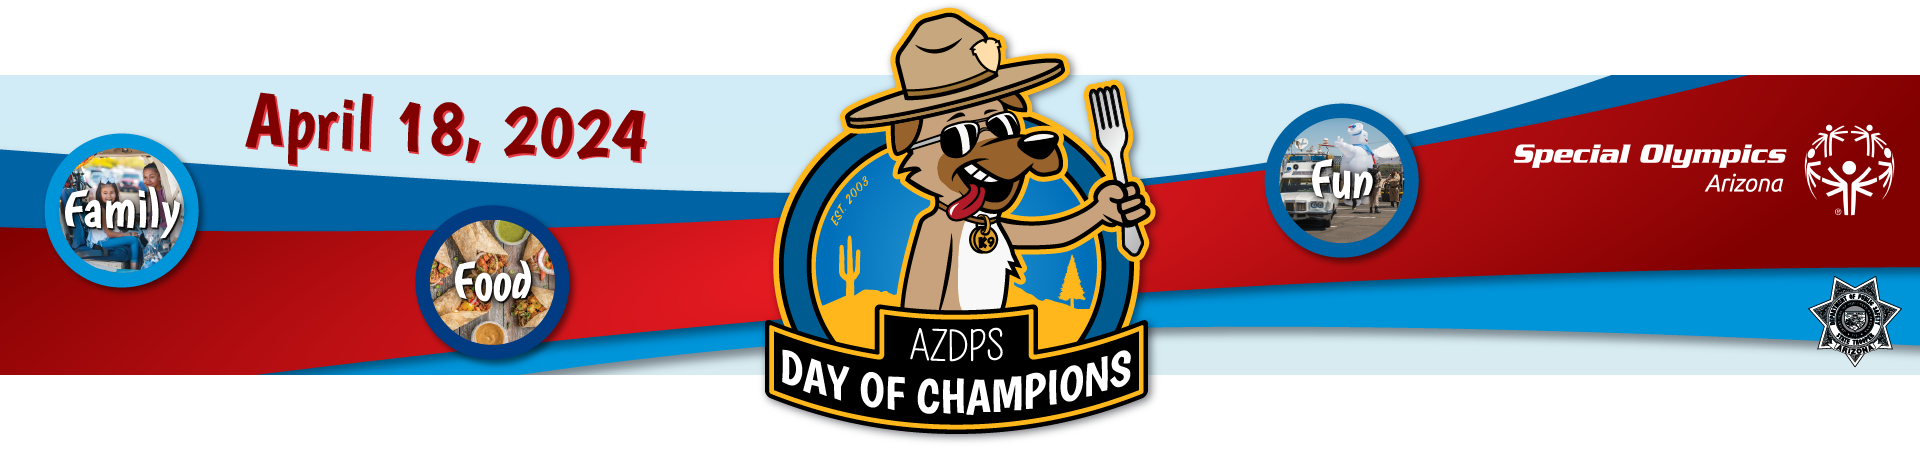 18th annual day of champions, April 18th 2024